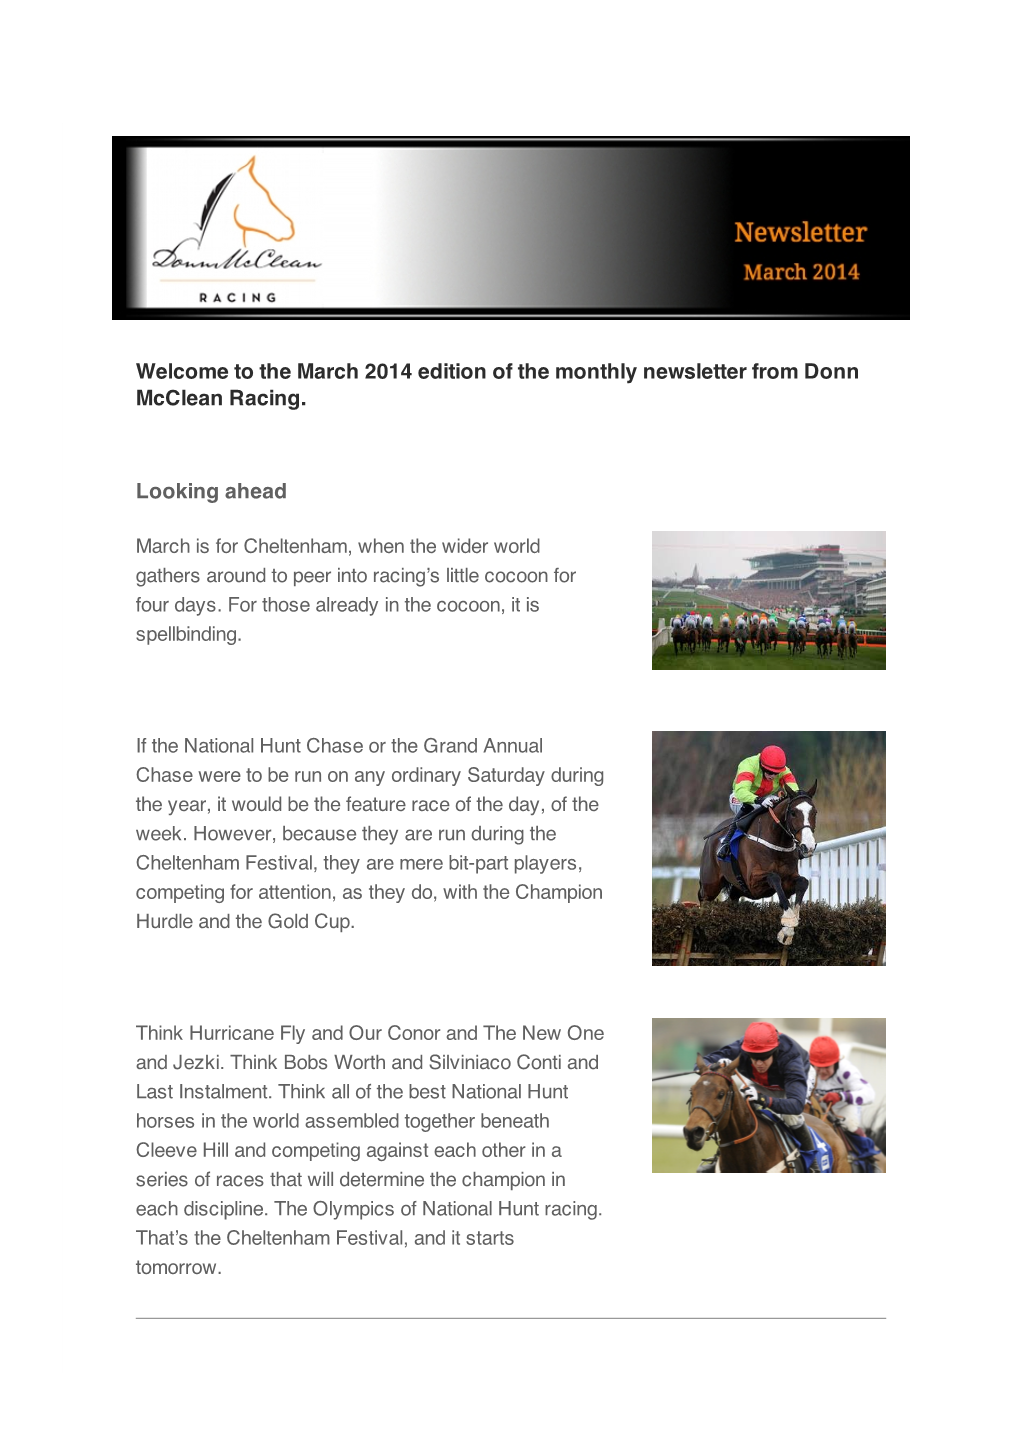 Welcome to the March 2014 Edition of the Monthly Newsletter from Donn Mcclean Racing